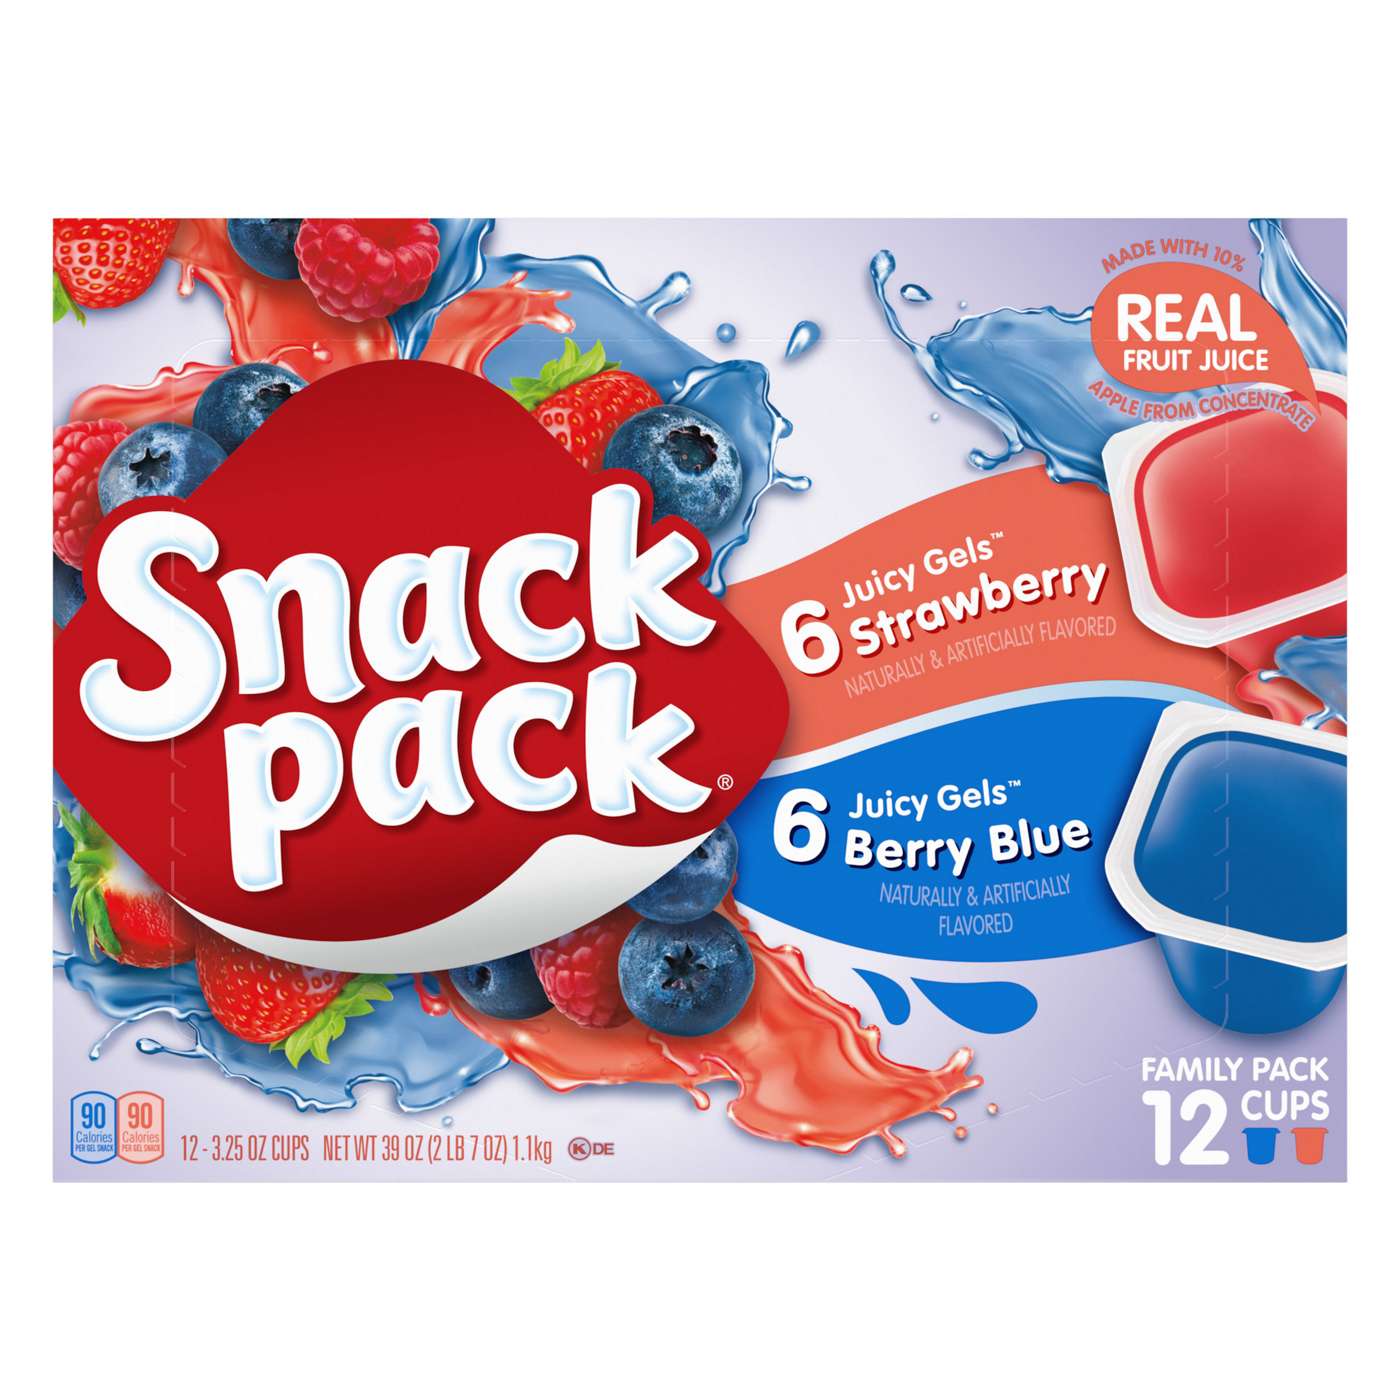 Snack Pack Strawberry & Berry Blue Juicy Gels Cups Family Pack; image 2 of 7